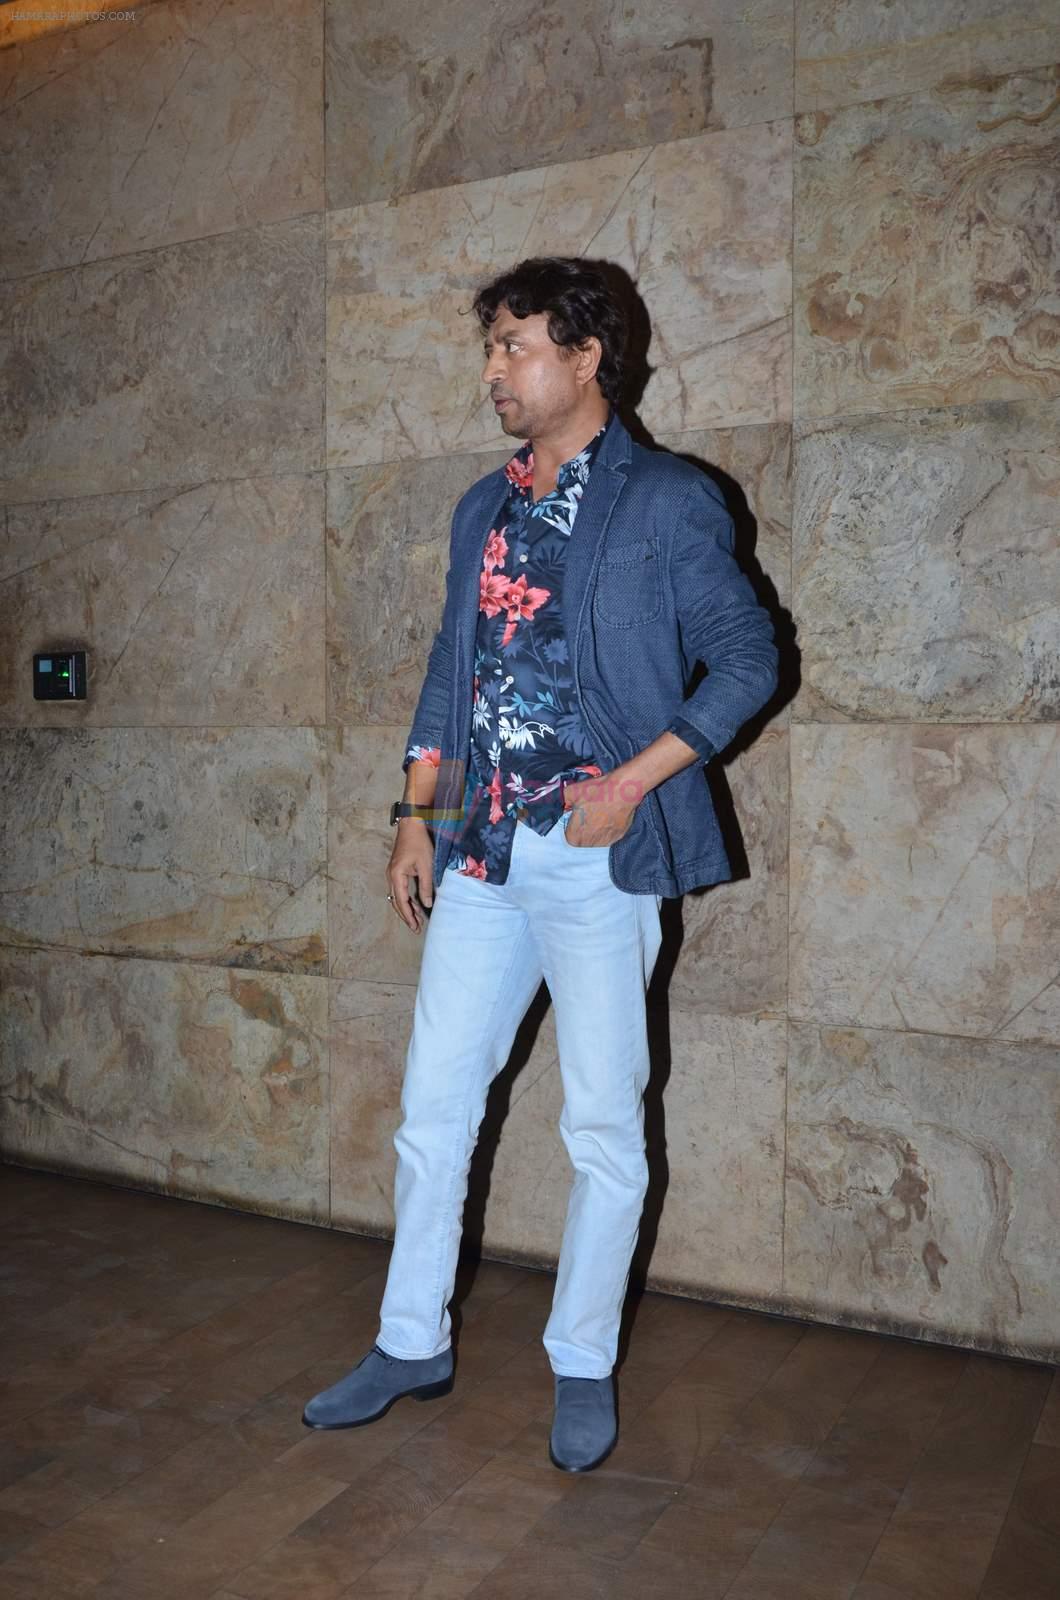 Irrfan Khan at Amy Screening in Lightbox on 9th July 2015